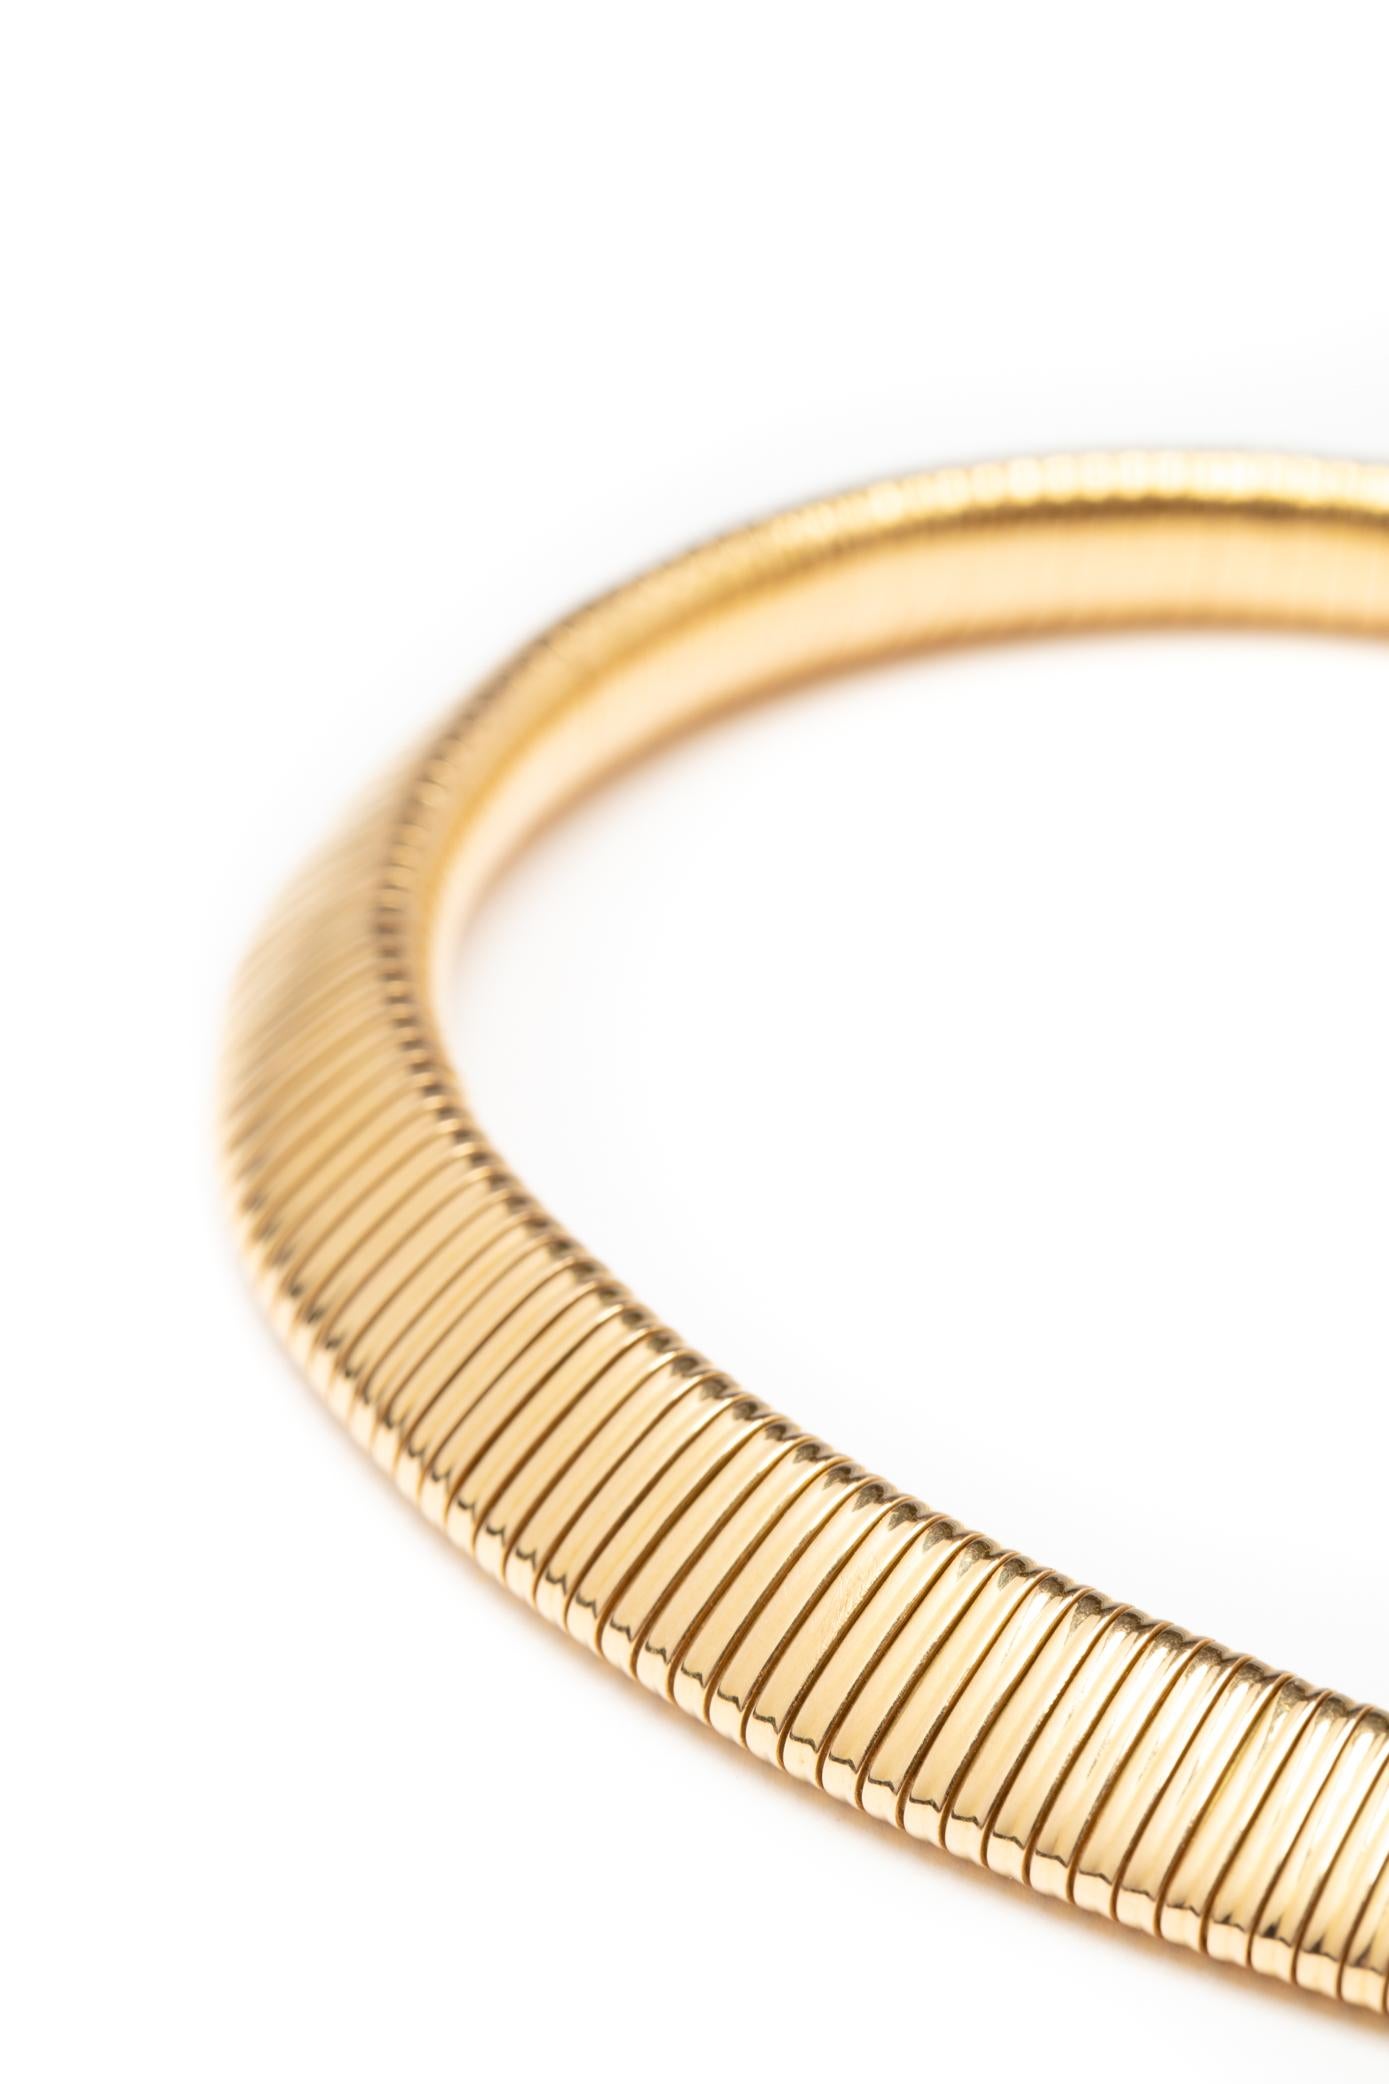 The perfect 18kt yellow gold necklace for everyday wear or add to dress it up for evening.
This vintage gas tube necklace is so comfortable to wear and looks great on.


